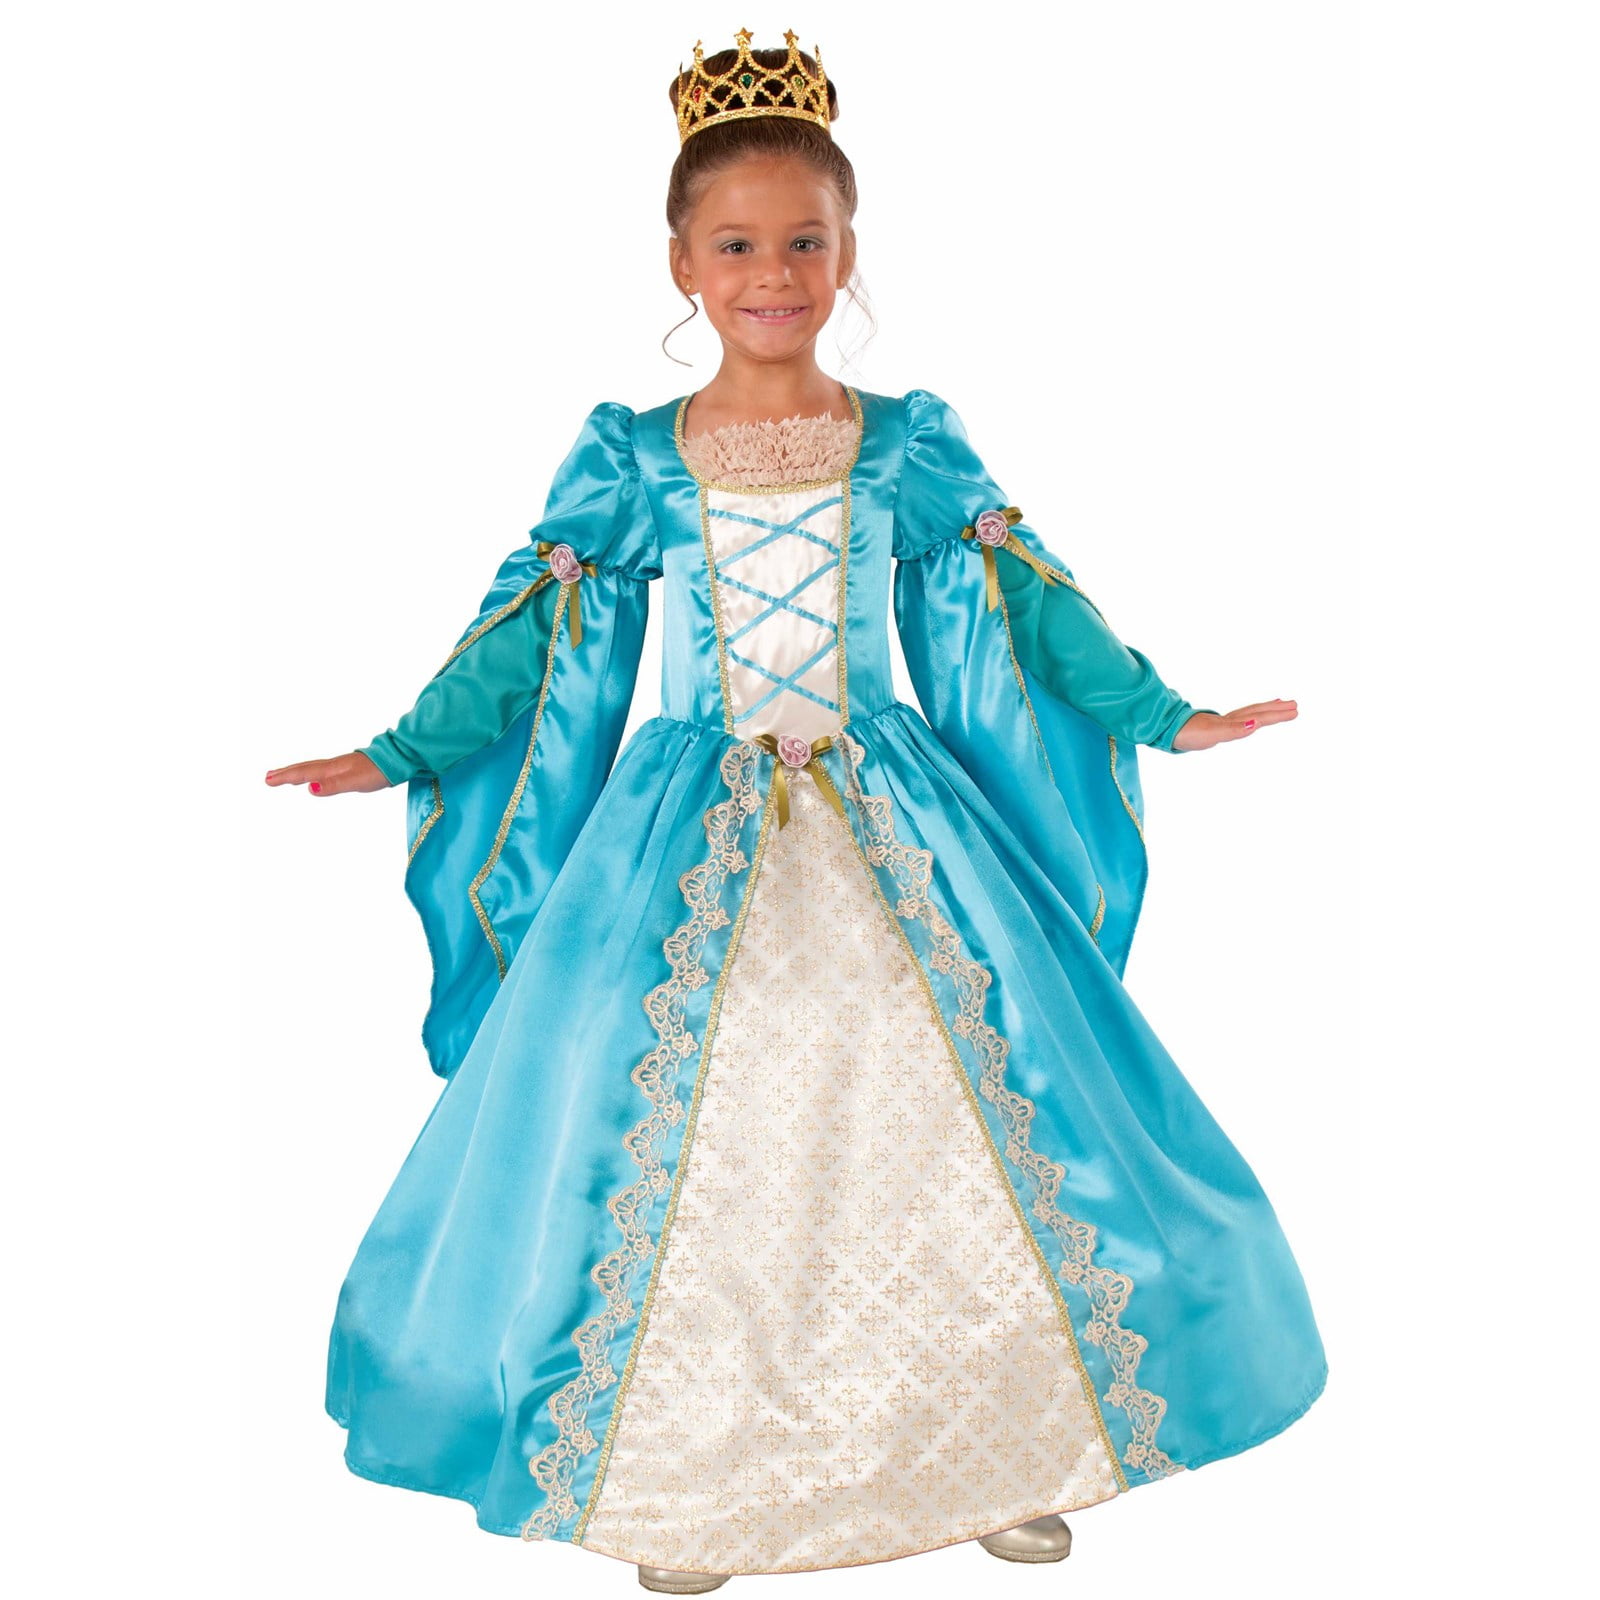 Fancy Dress Up Girls 3-5 Years Fancy Dress for Kids & Toddlers by Pretend to Bee Royal Princess Costumes for Girls Premium Princess Dress Up for Girls Royal Queen Costume w/ Queen Crown